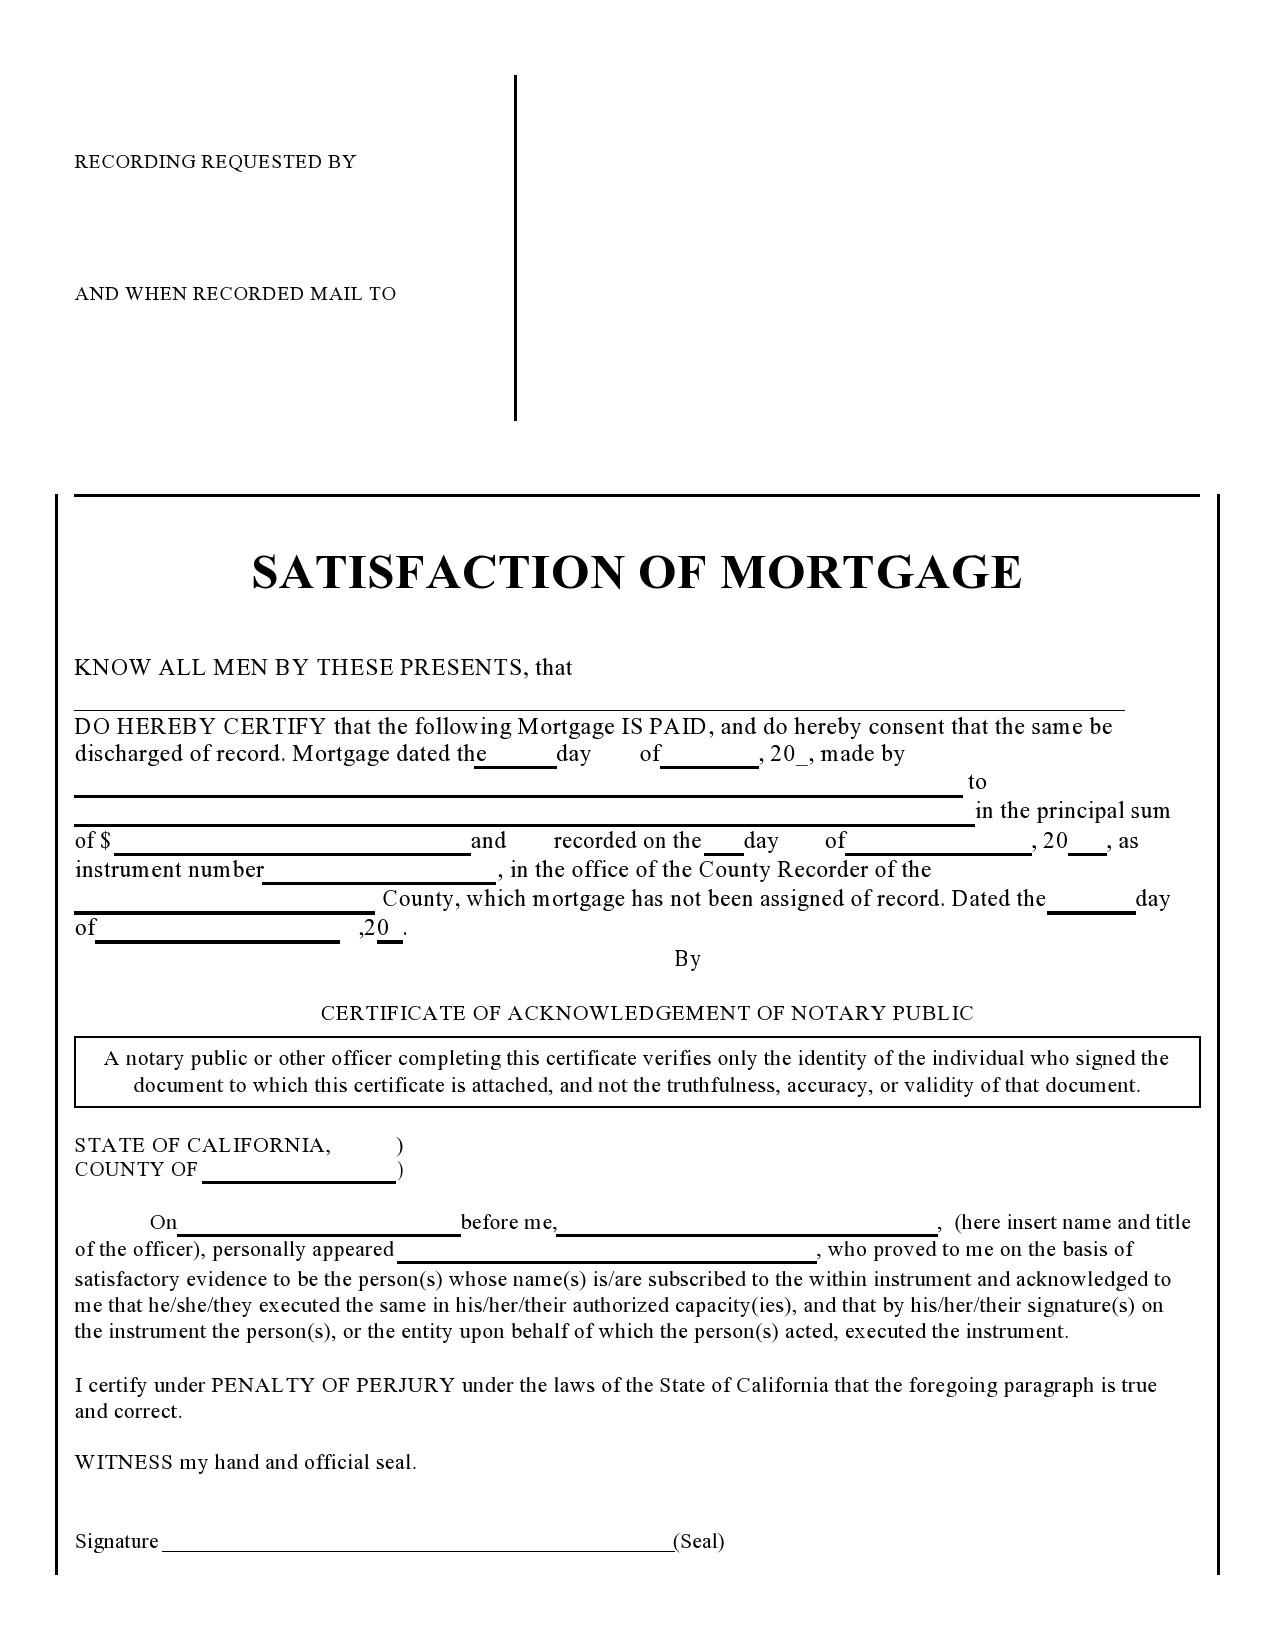 Free satisfaction of mortgage 24